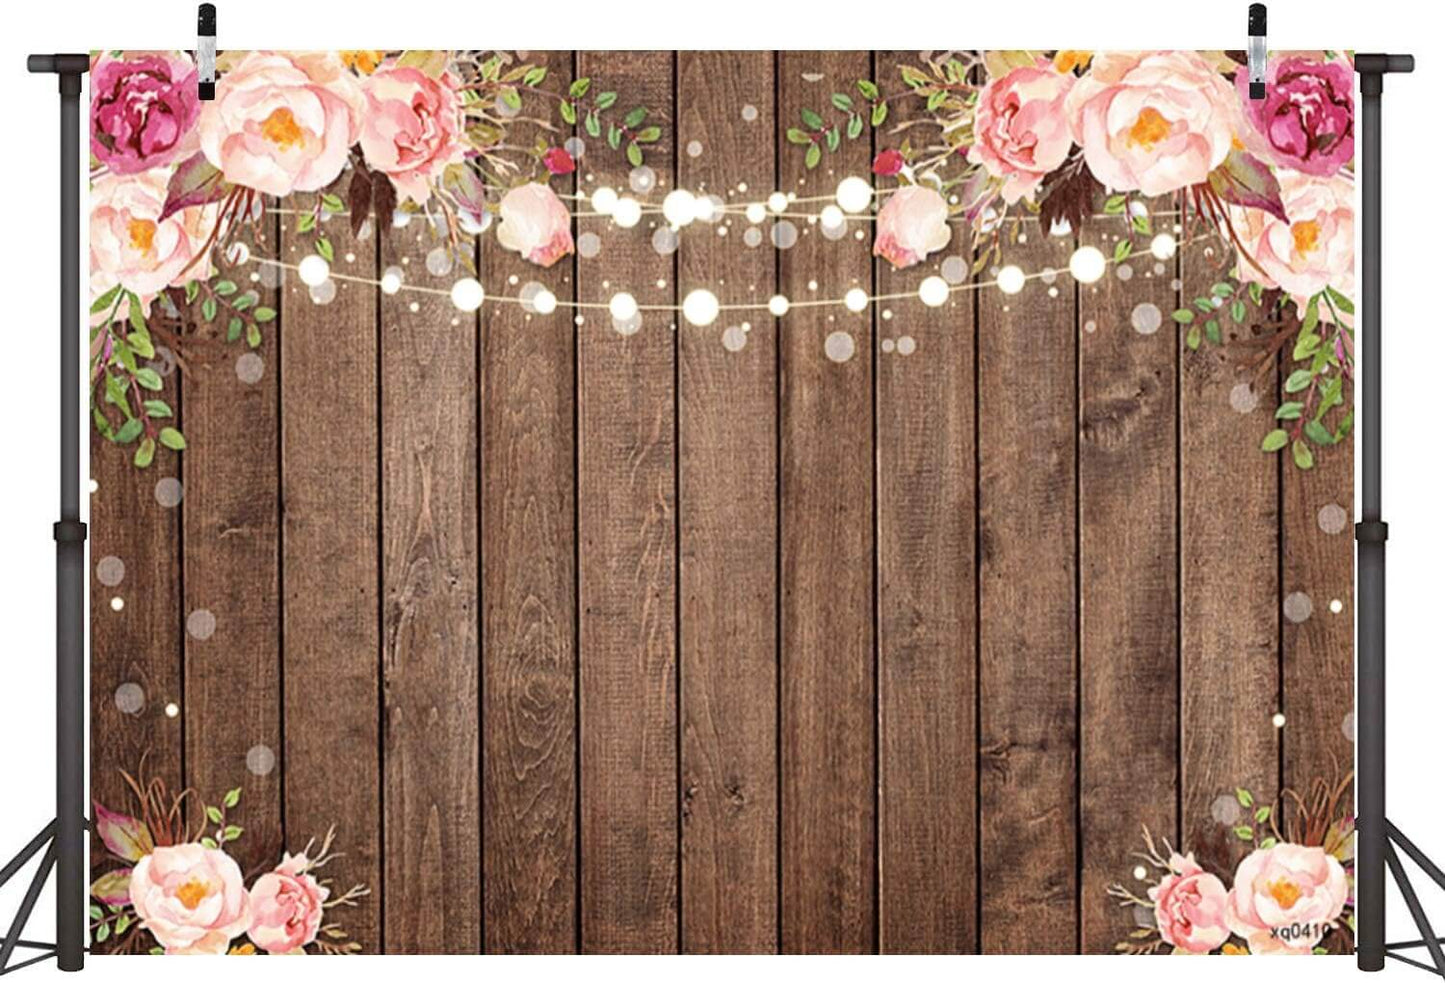 Rustic Wood Flower Birthday Party Banner Bridal Shower Photography Background Photocall